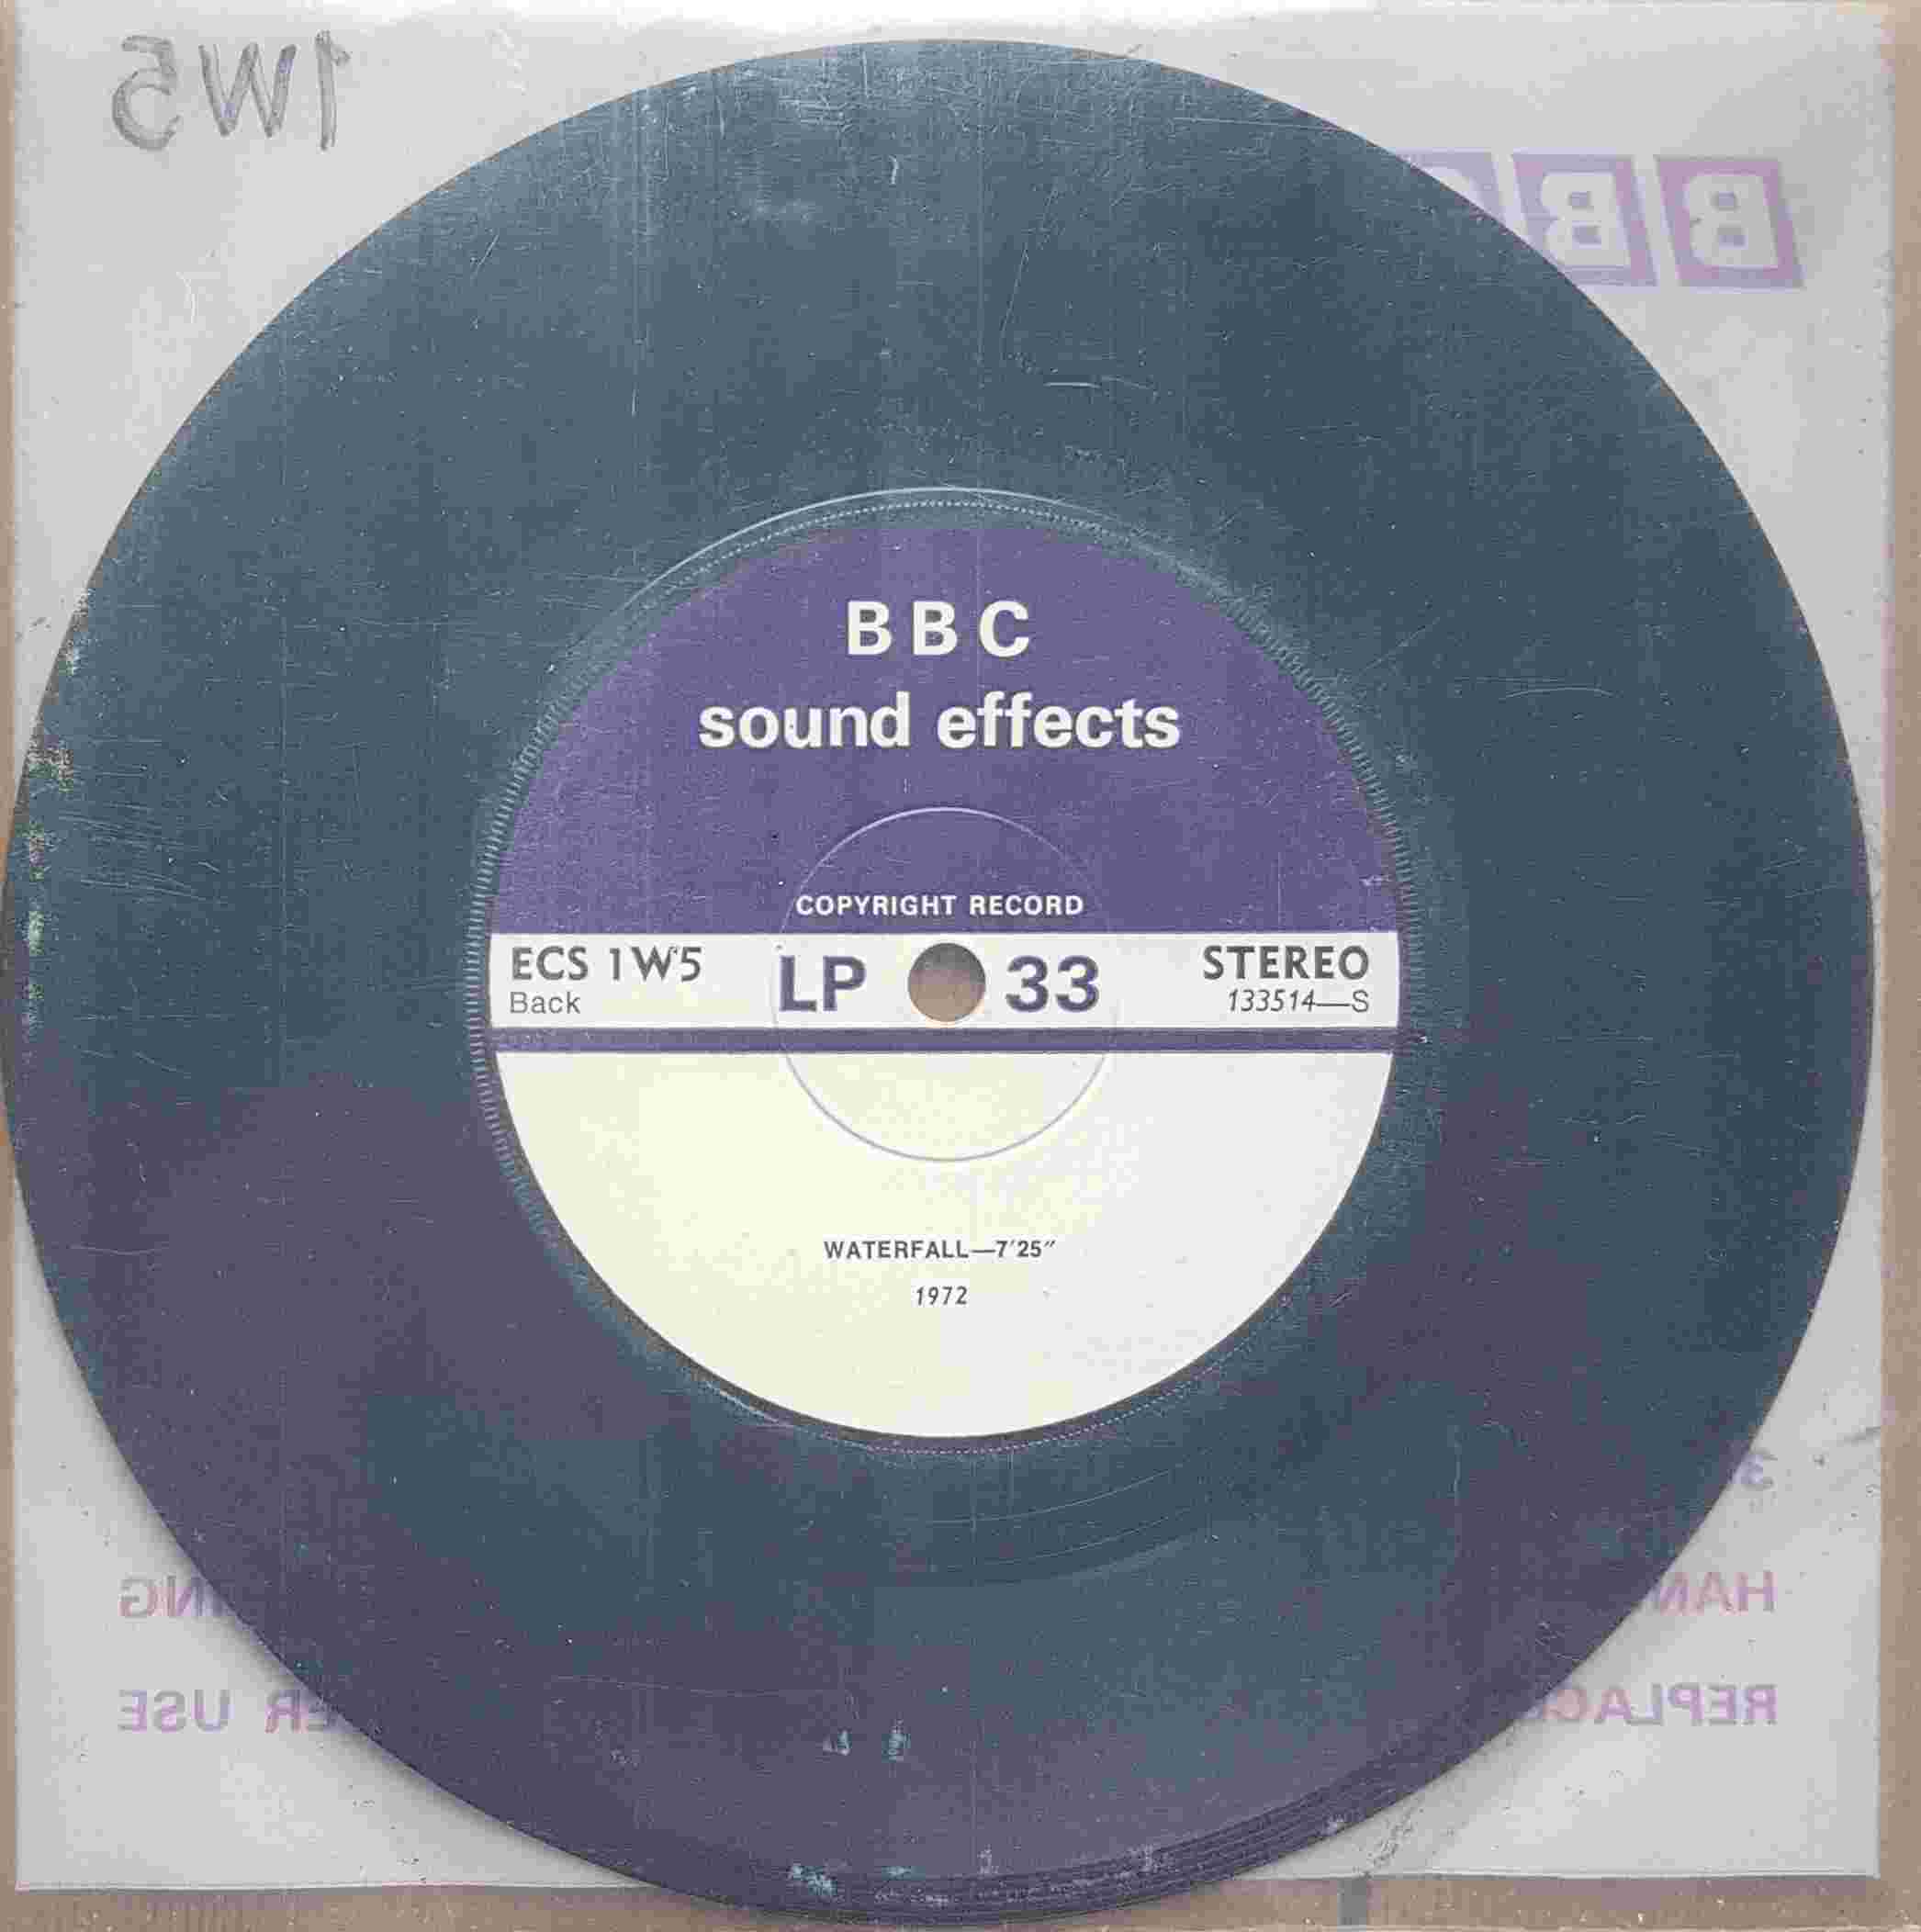 Picture of ECS 1W5 Stream / Waterfall by artist Not registered from the BBC records and Tapes library